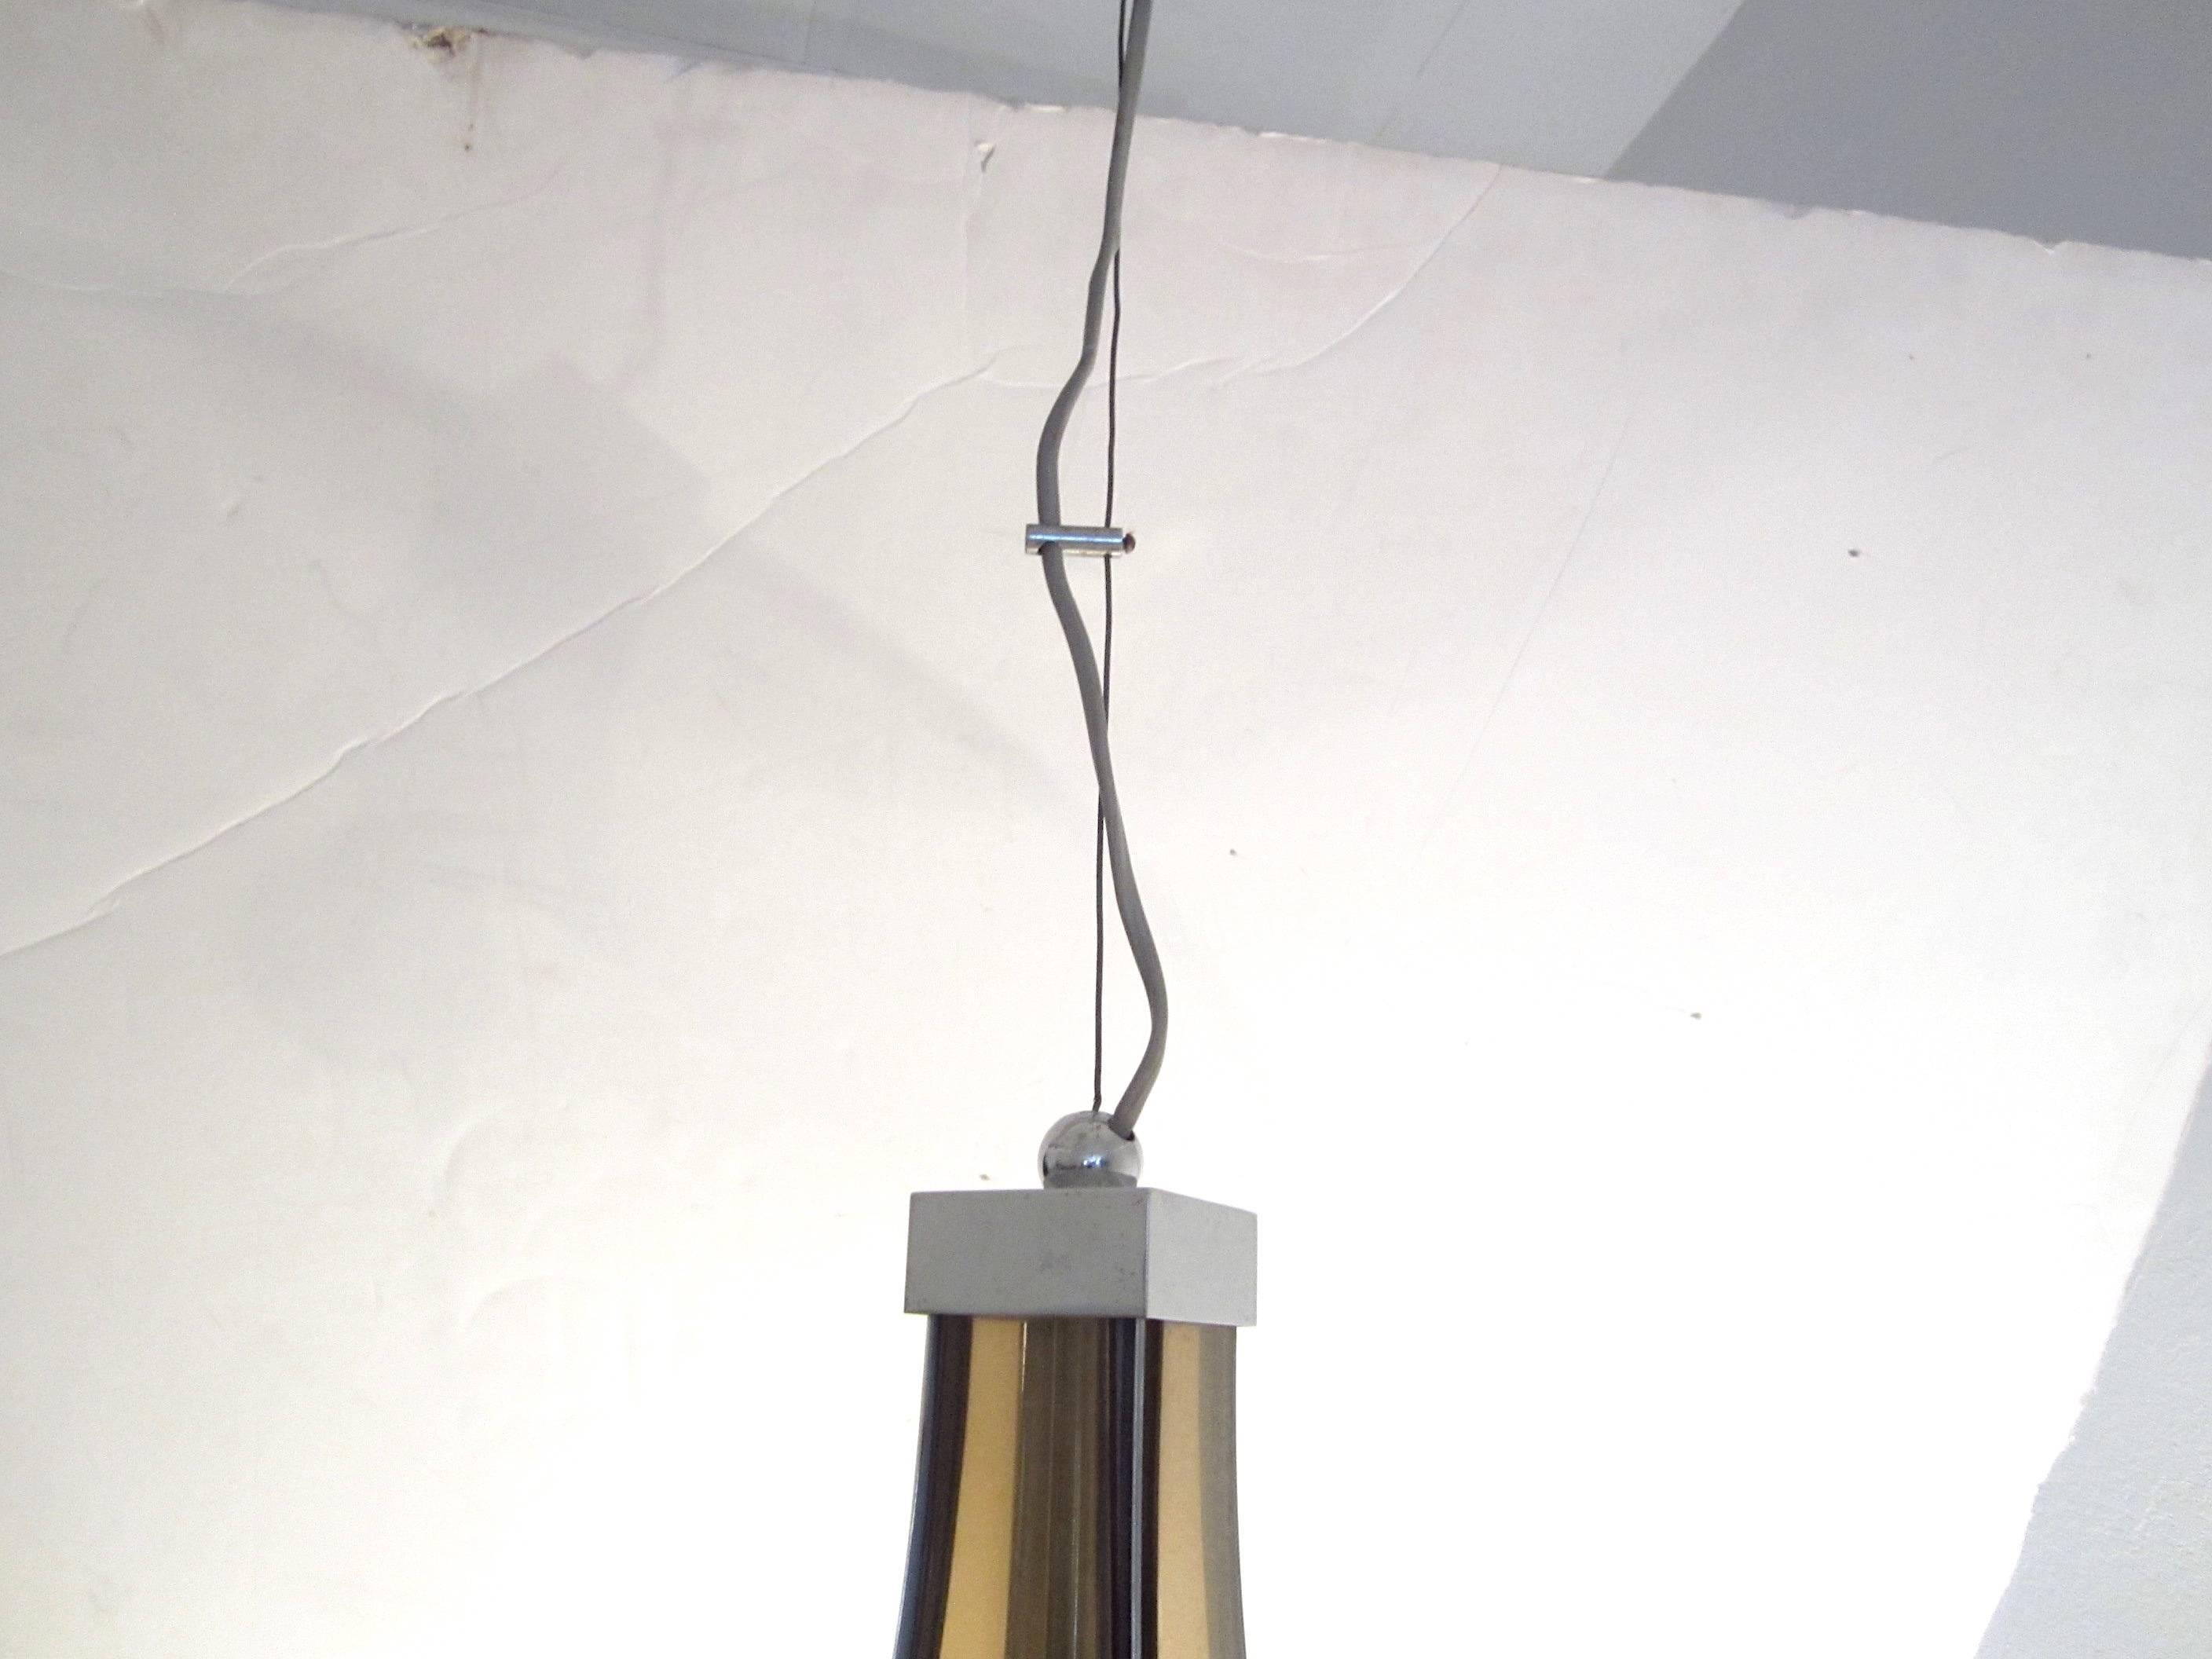 Italian Amber Glass and Chrome Hanging Light Fixture with Cable and Canopy In Good Condition For Sale In Miami, FL